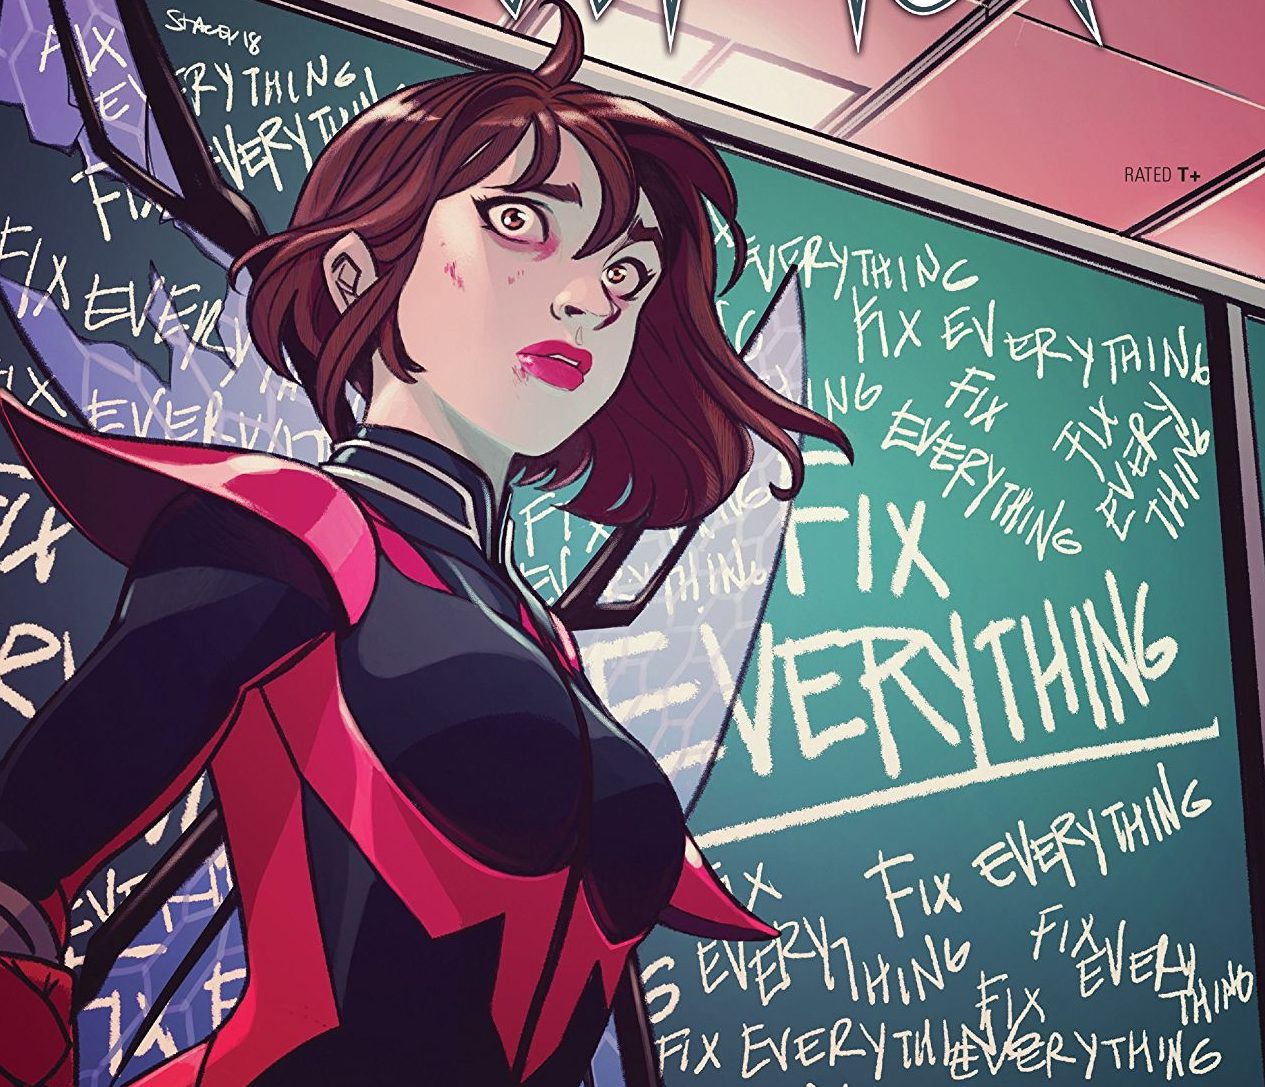 More than mania: A psychiatrist looks at the Unstoppable Wasp's Bipolar Disorder